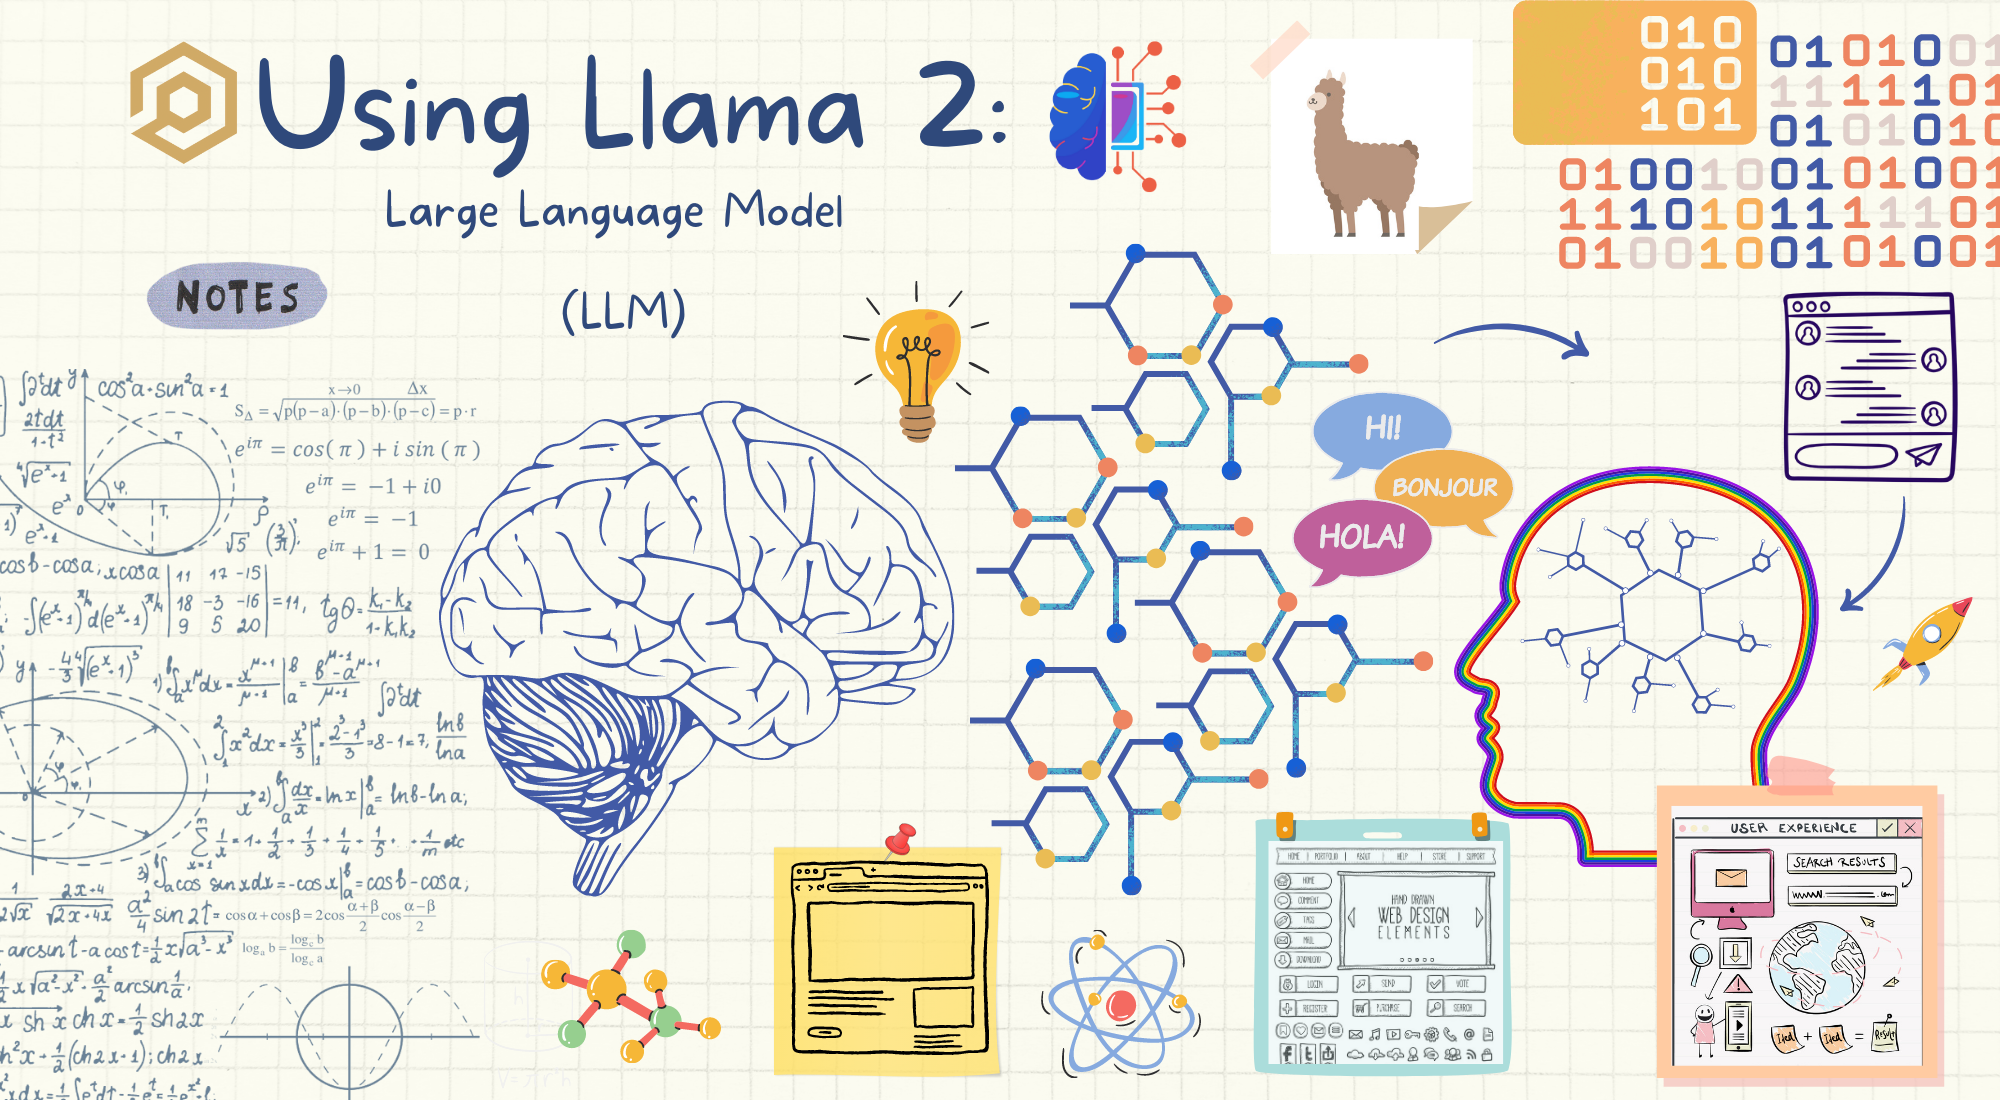 How to Run Llama 2 Locally: A Guide to Running Your Own ChatGPT like Large Language Model